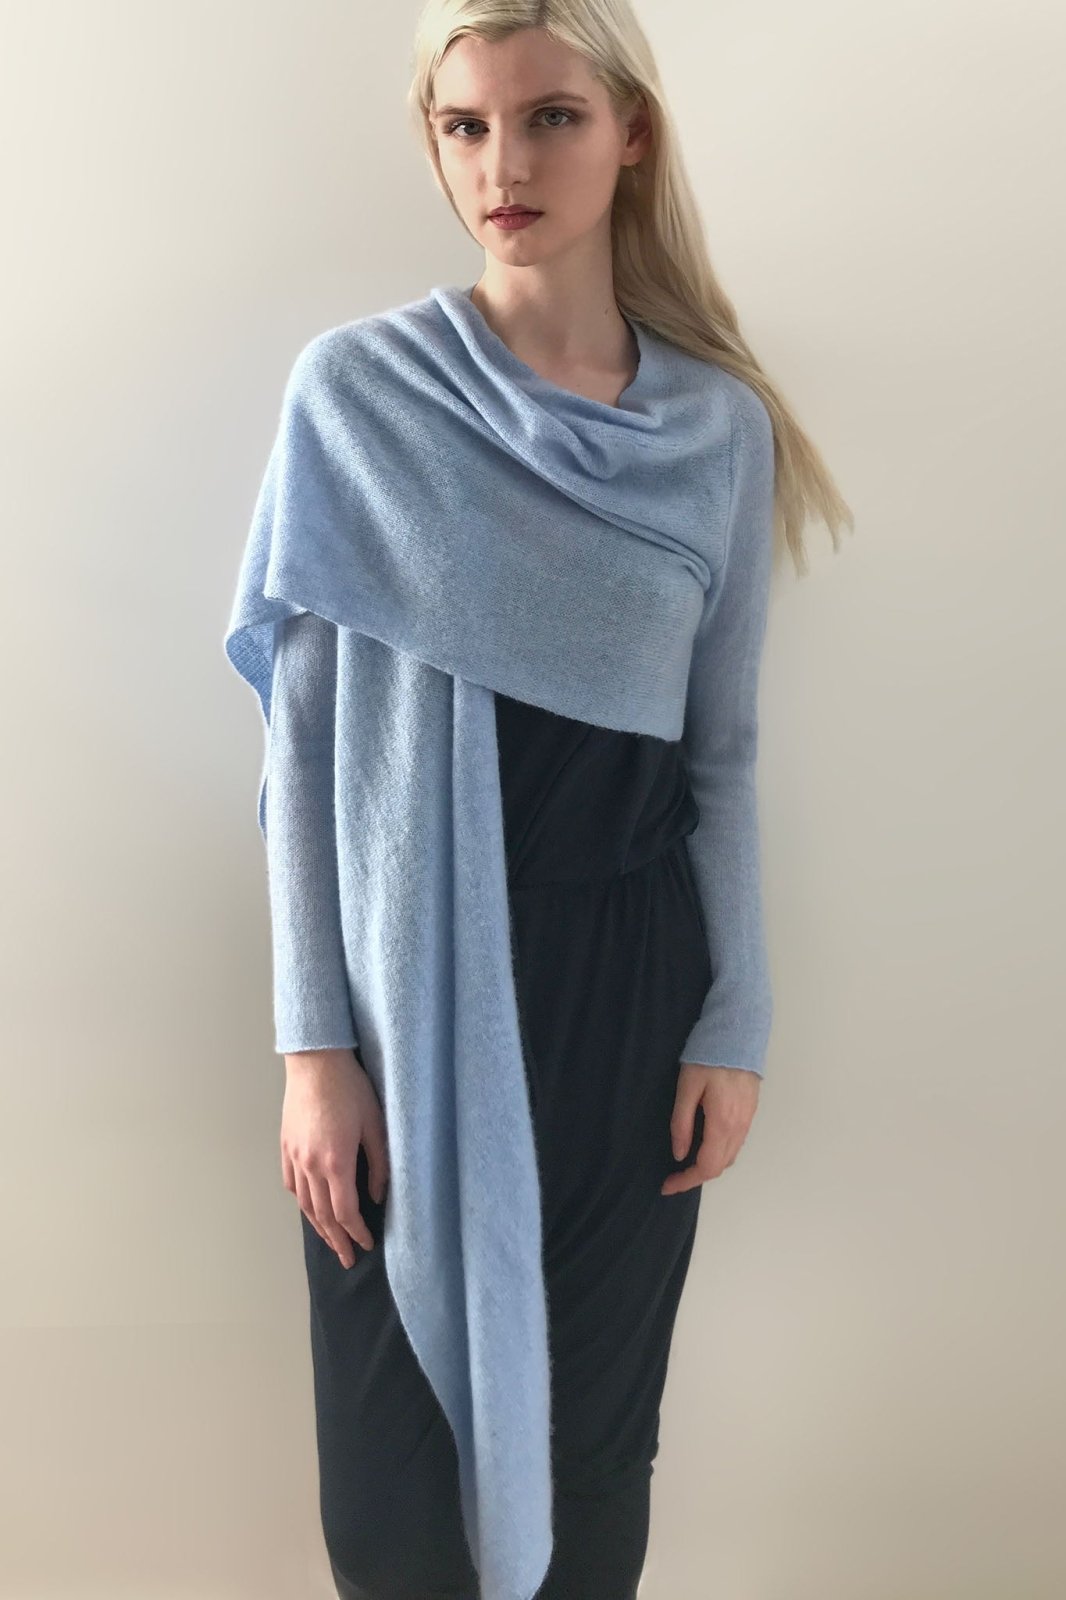 Long front light weight cashmere cardigan in powder blue - SEMON Cashmere